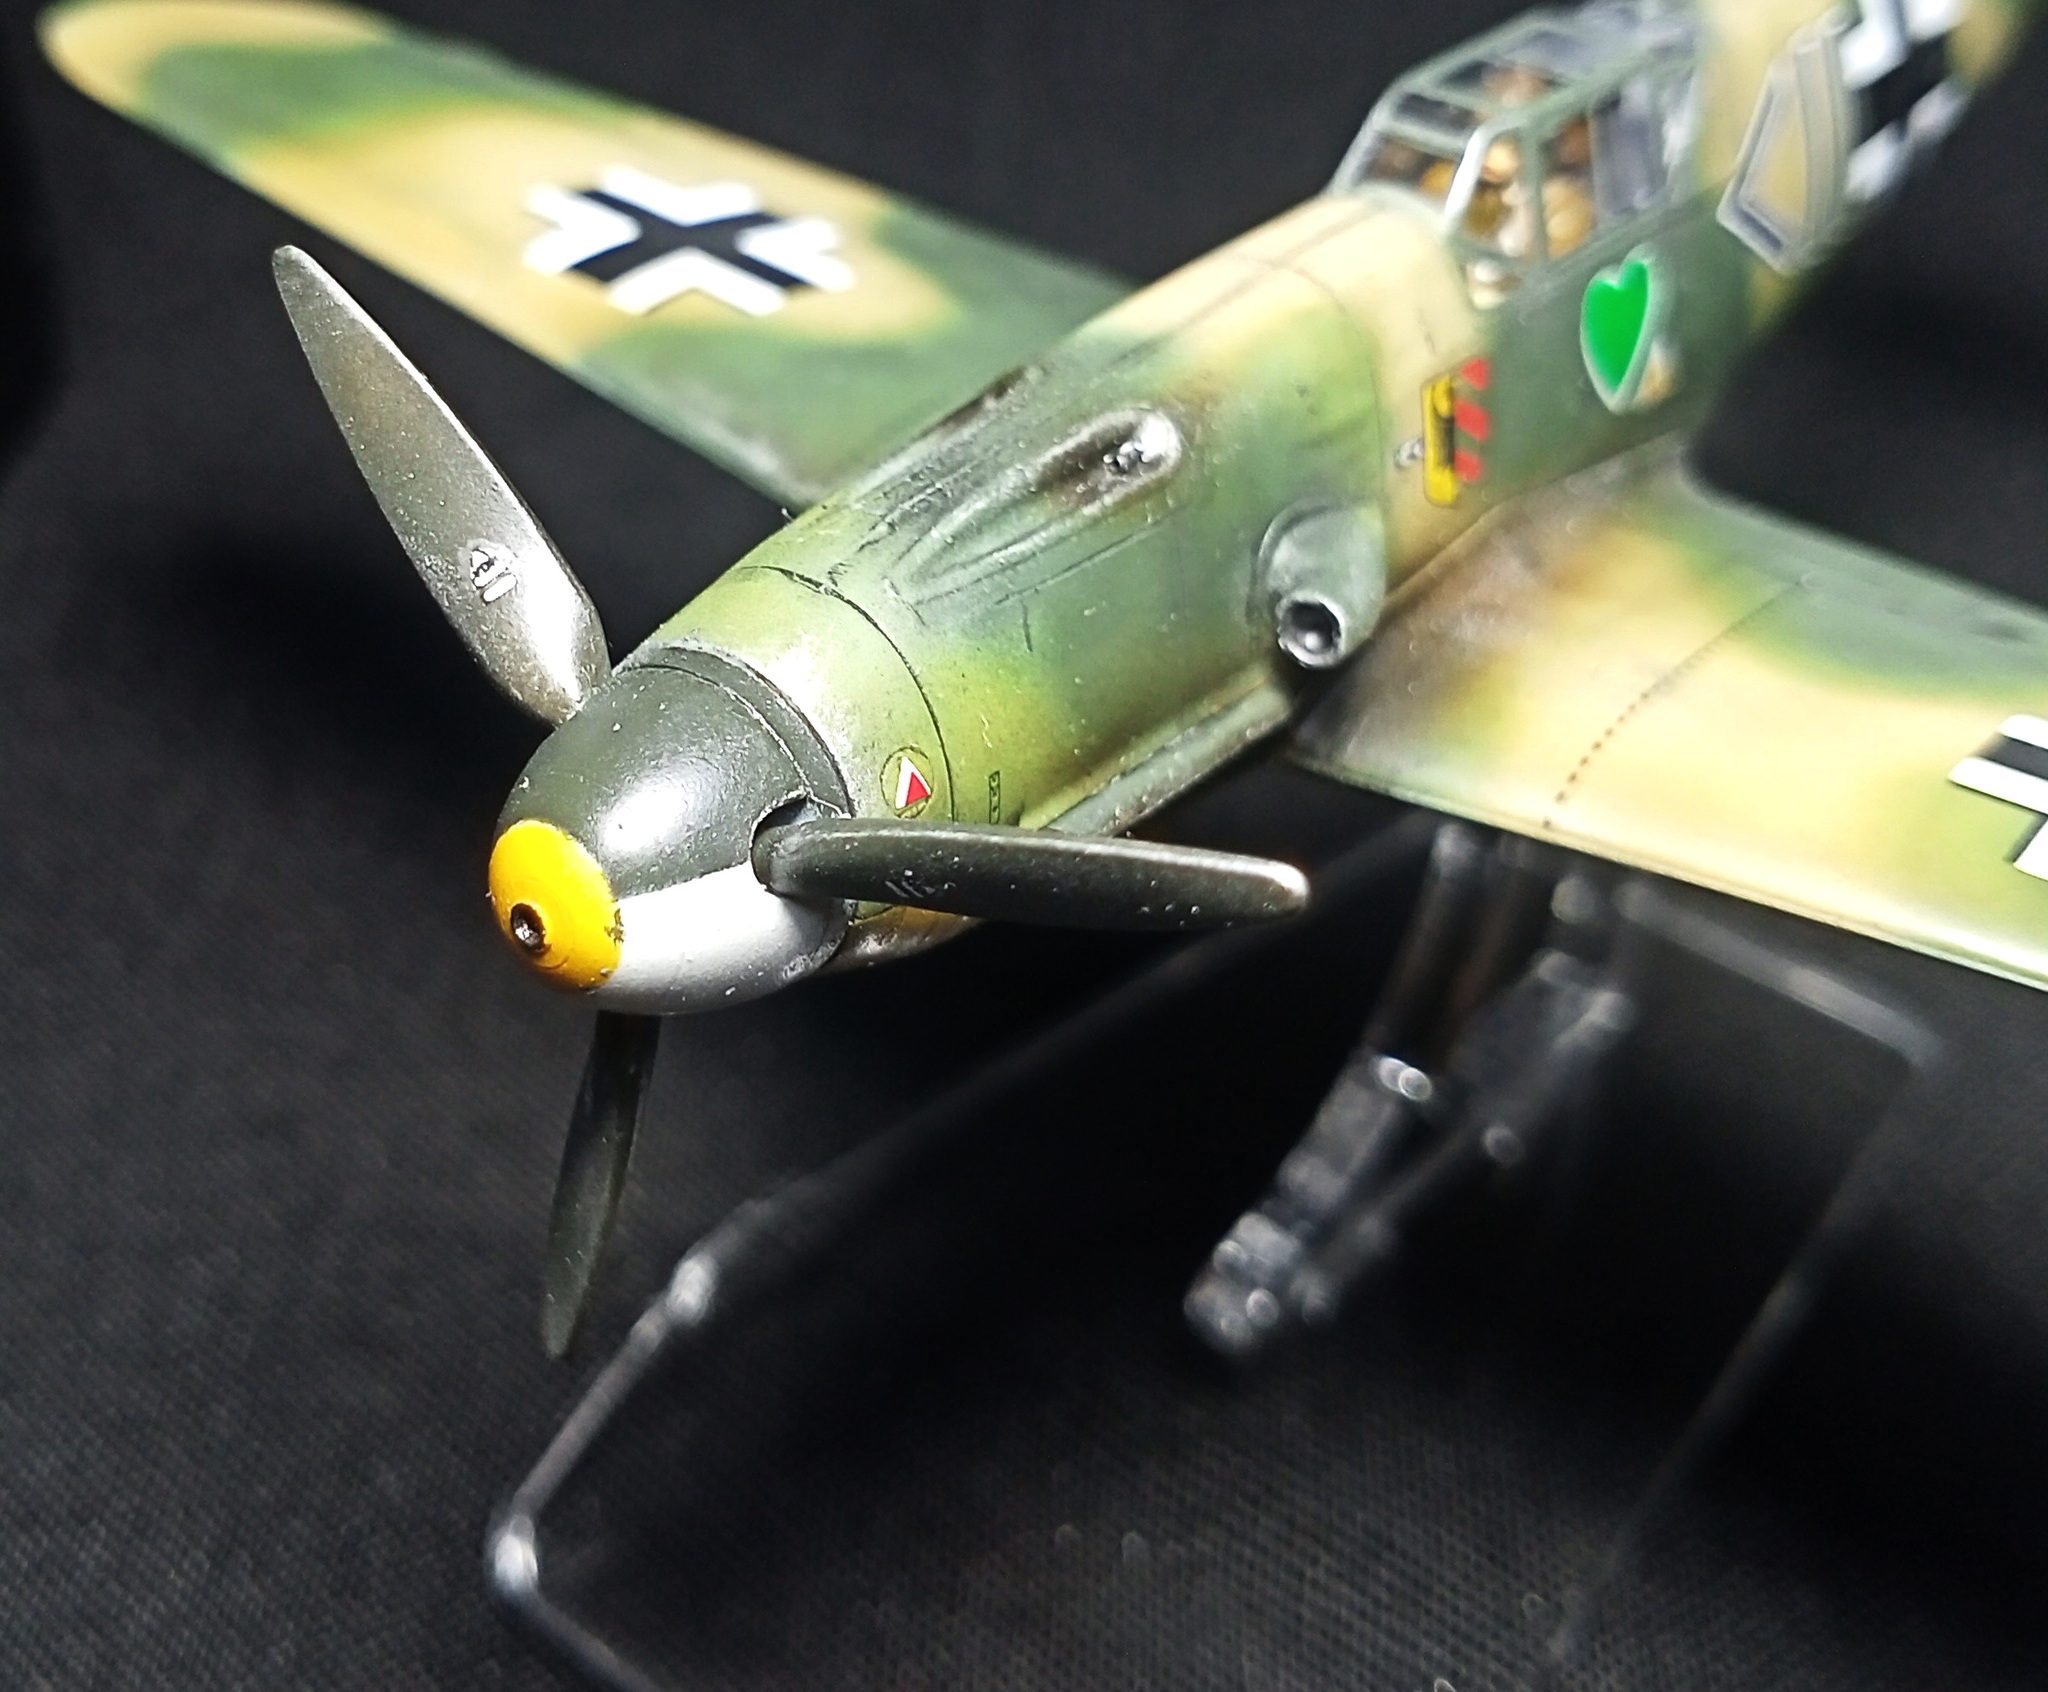 The Elusive Frederick. Messerschmitt Bf.109F-2 Friedrich Hans Philipp - My, Modeling, Stand modeling, Prefabricated model, Aircraft modeling, Hobby, Miniature, With your own hands, Needlework without process, Aviation, Story, Airplane, The Second World War, Scale model, Collection, Collecting, Germany, Luftwaffe, Fighter, Messerschmitt, Video, Longpost